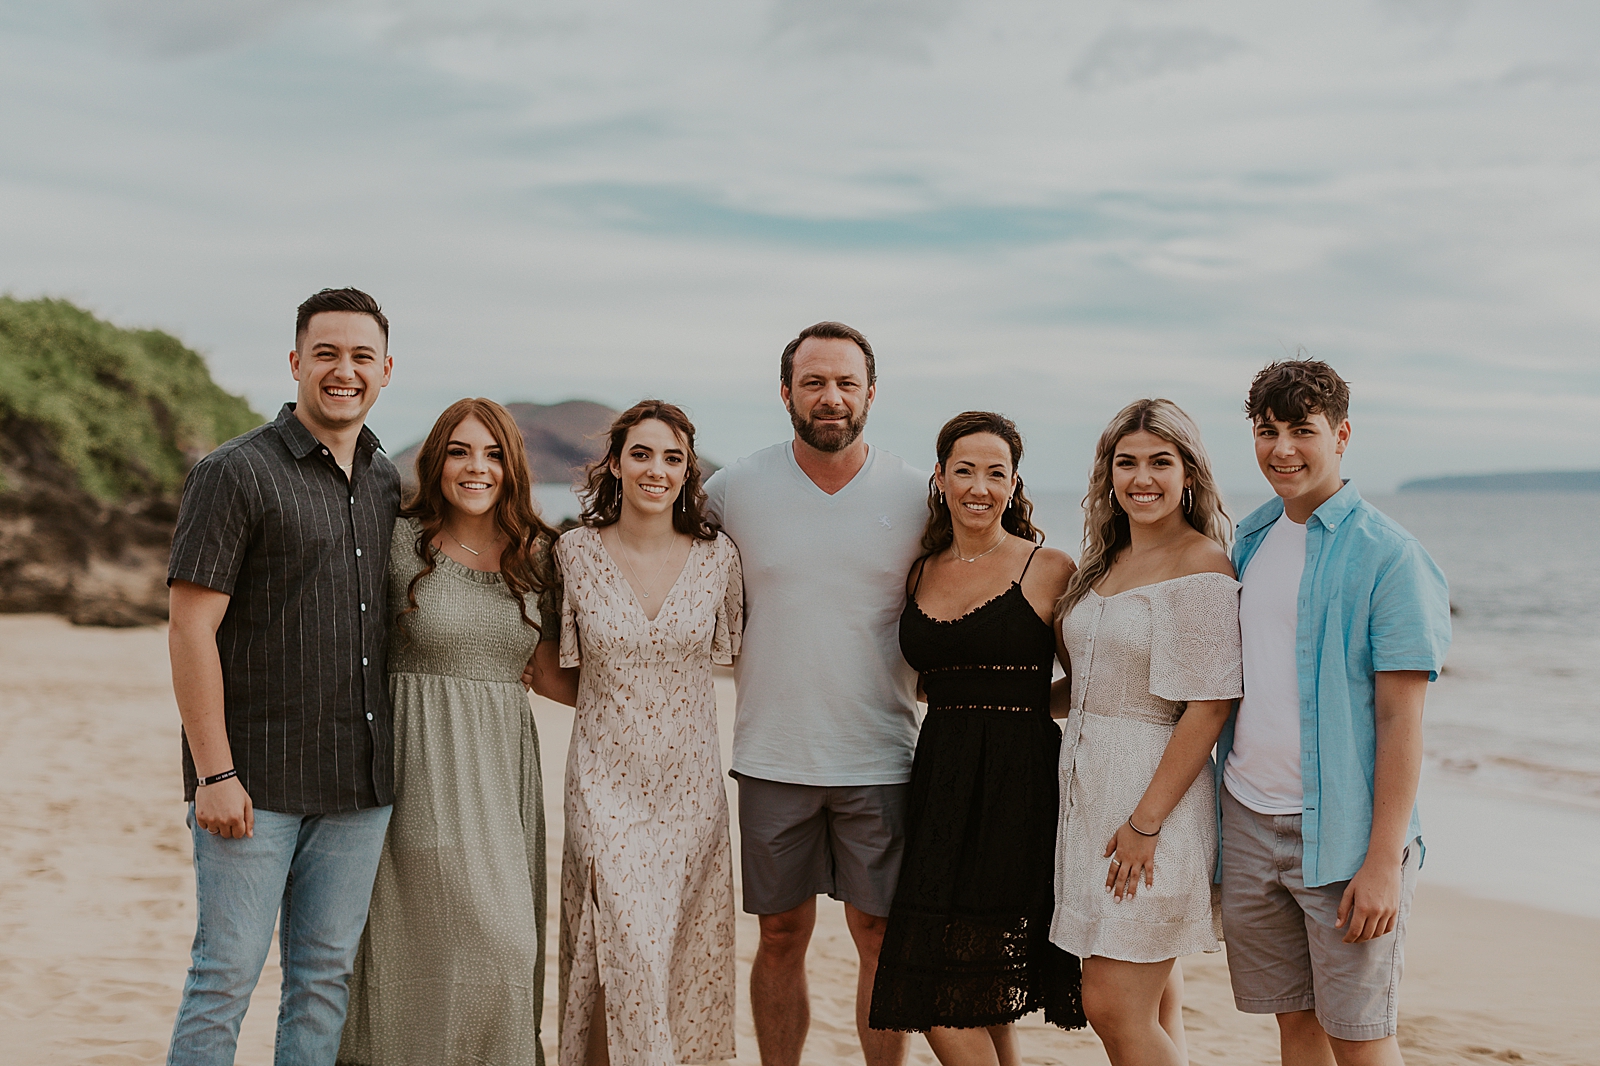 Entire grown up family arms wrapped around each other on the beach in front of the ocean